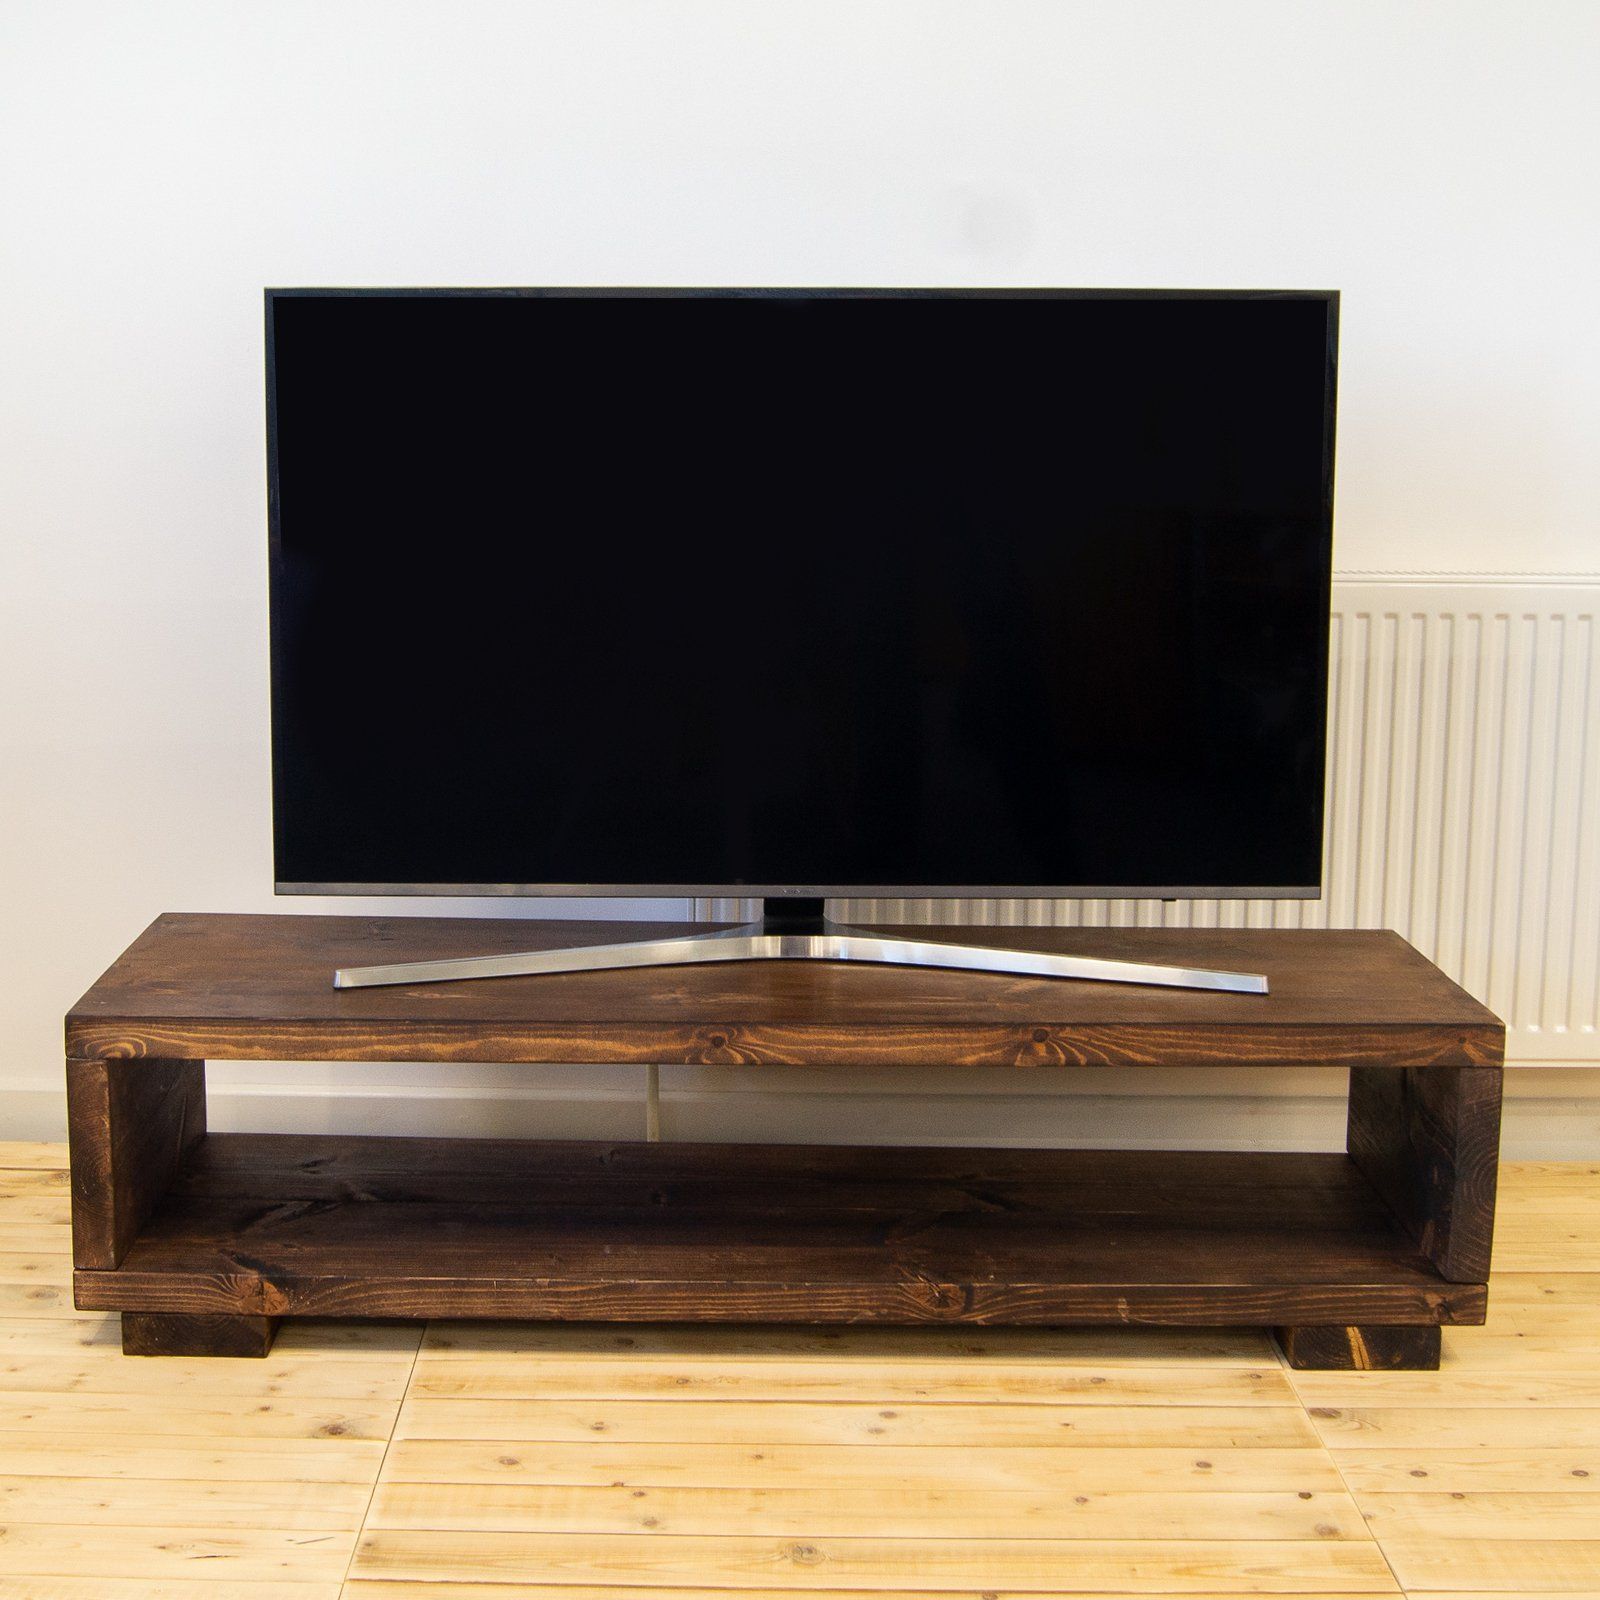 Rustic Solid Pine Tv Stand Handmade With Wooden Legs Tv001 With Regard To Rustic Furniture Tv Stands (View 9 of 15)